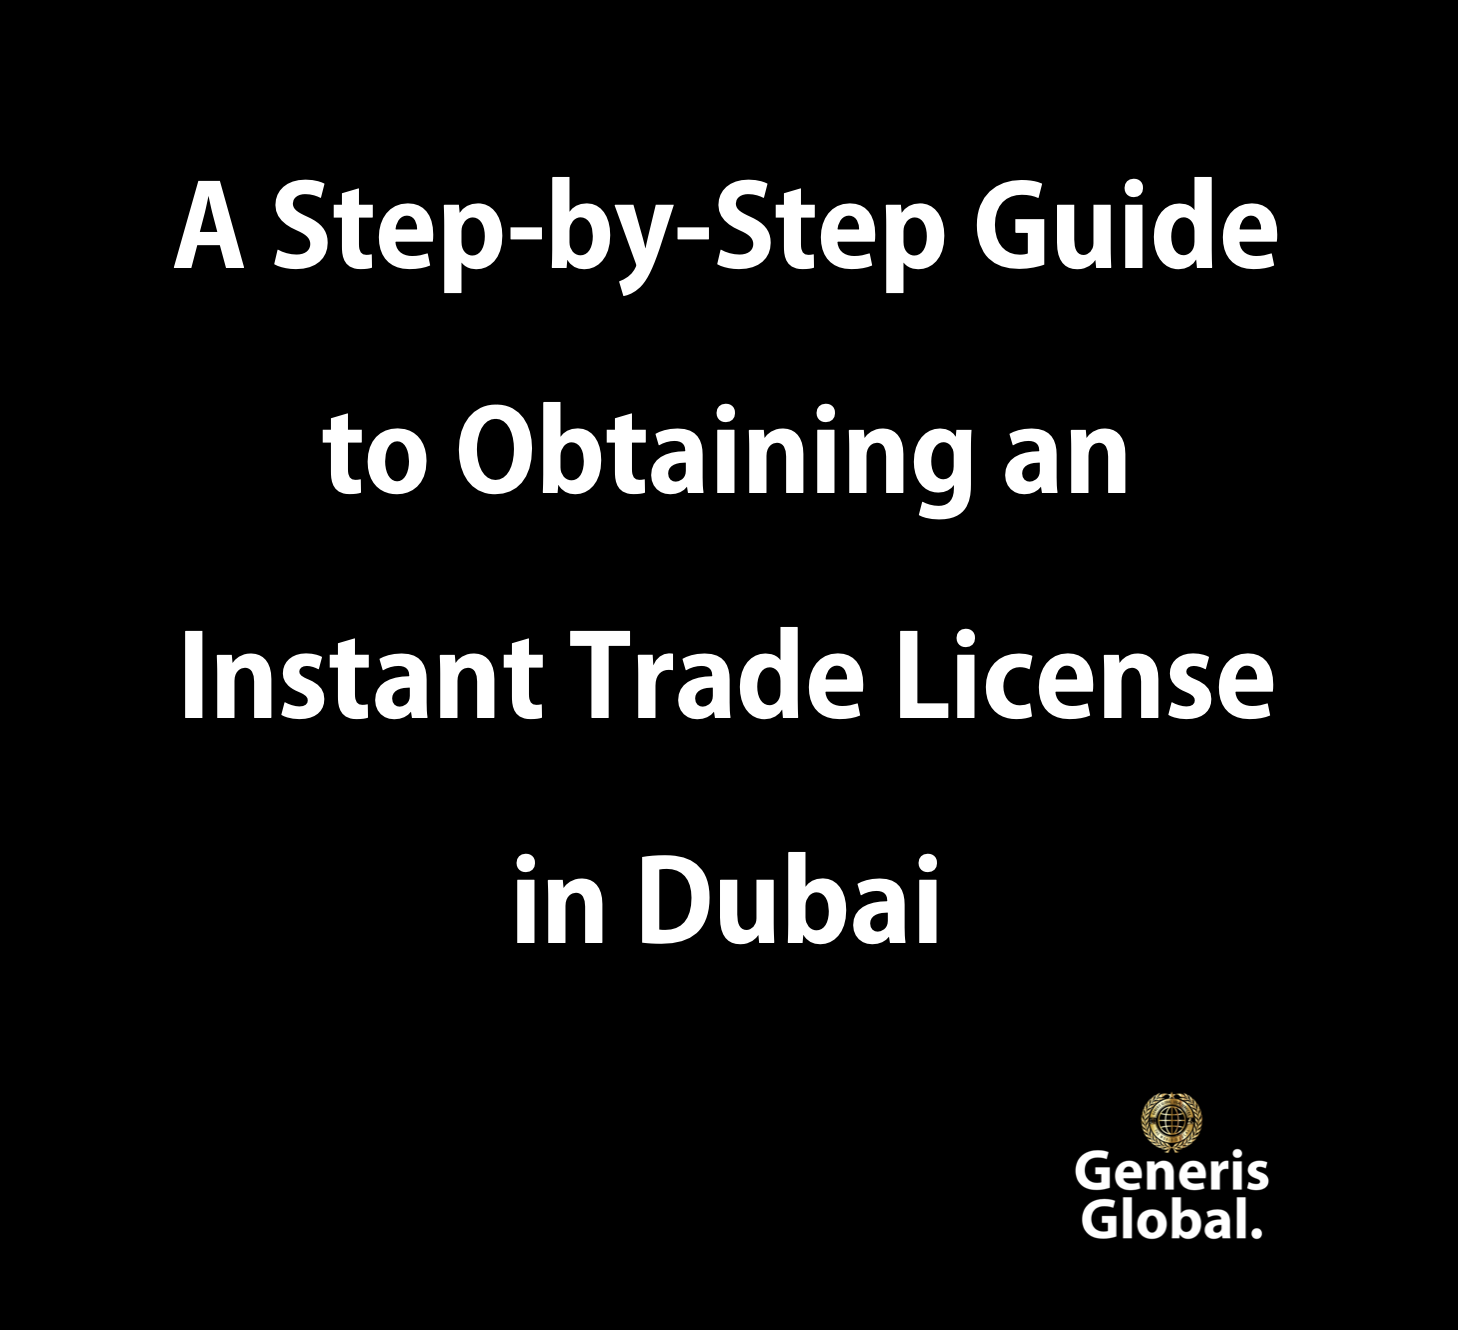 A Step-by-Step Guide to Obtaining an Instant Trade License in Dubai